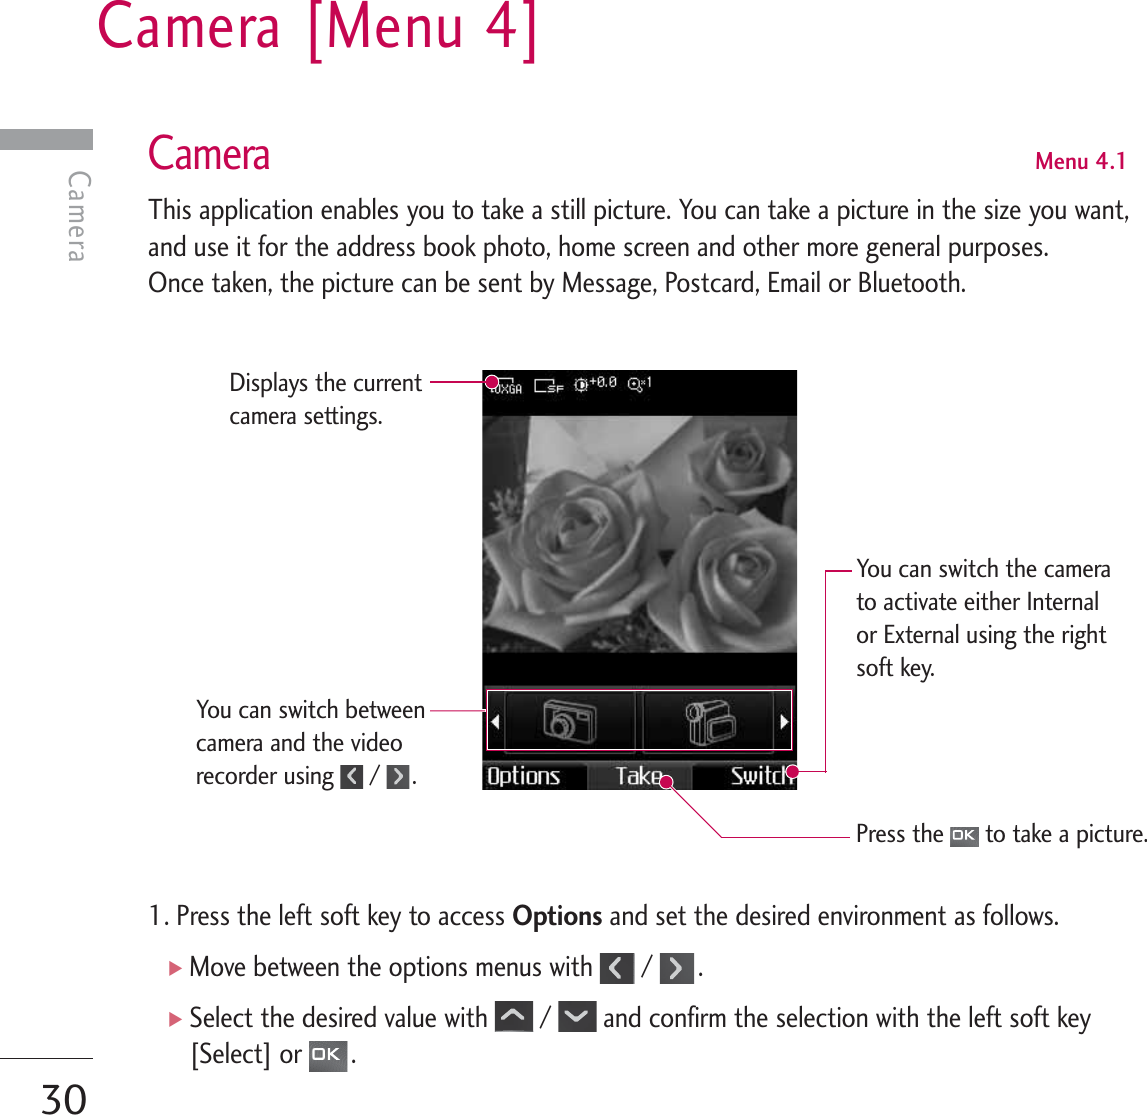 Camera [Menu 4]30CameraCameraMenu 4.1This application enables you to take a still picture. You can take a picture in the size you want,and use it for the address book photo, home screen and other more general purposes. Once taken, the picture can be sent by Message, Postcard, Email or Bluetooth.1. Press the left soft key to access Options and set the desired environment as follows. ]Move between the options menus with  /  .]Select the desired value with  /  and confirm the selection with the left soft key[Select] or  .Displays the currentcamera settings.You can switch betweencamera and the videorecorder using  /  .Press the  to take a picture. You can switch the camerato activate either Internalor External using the rightsoft key.